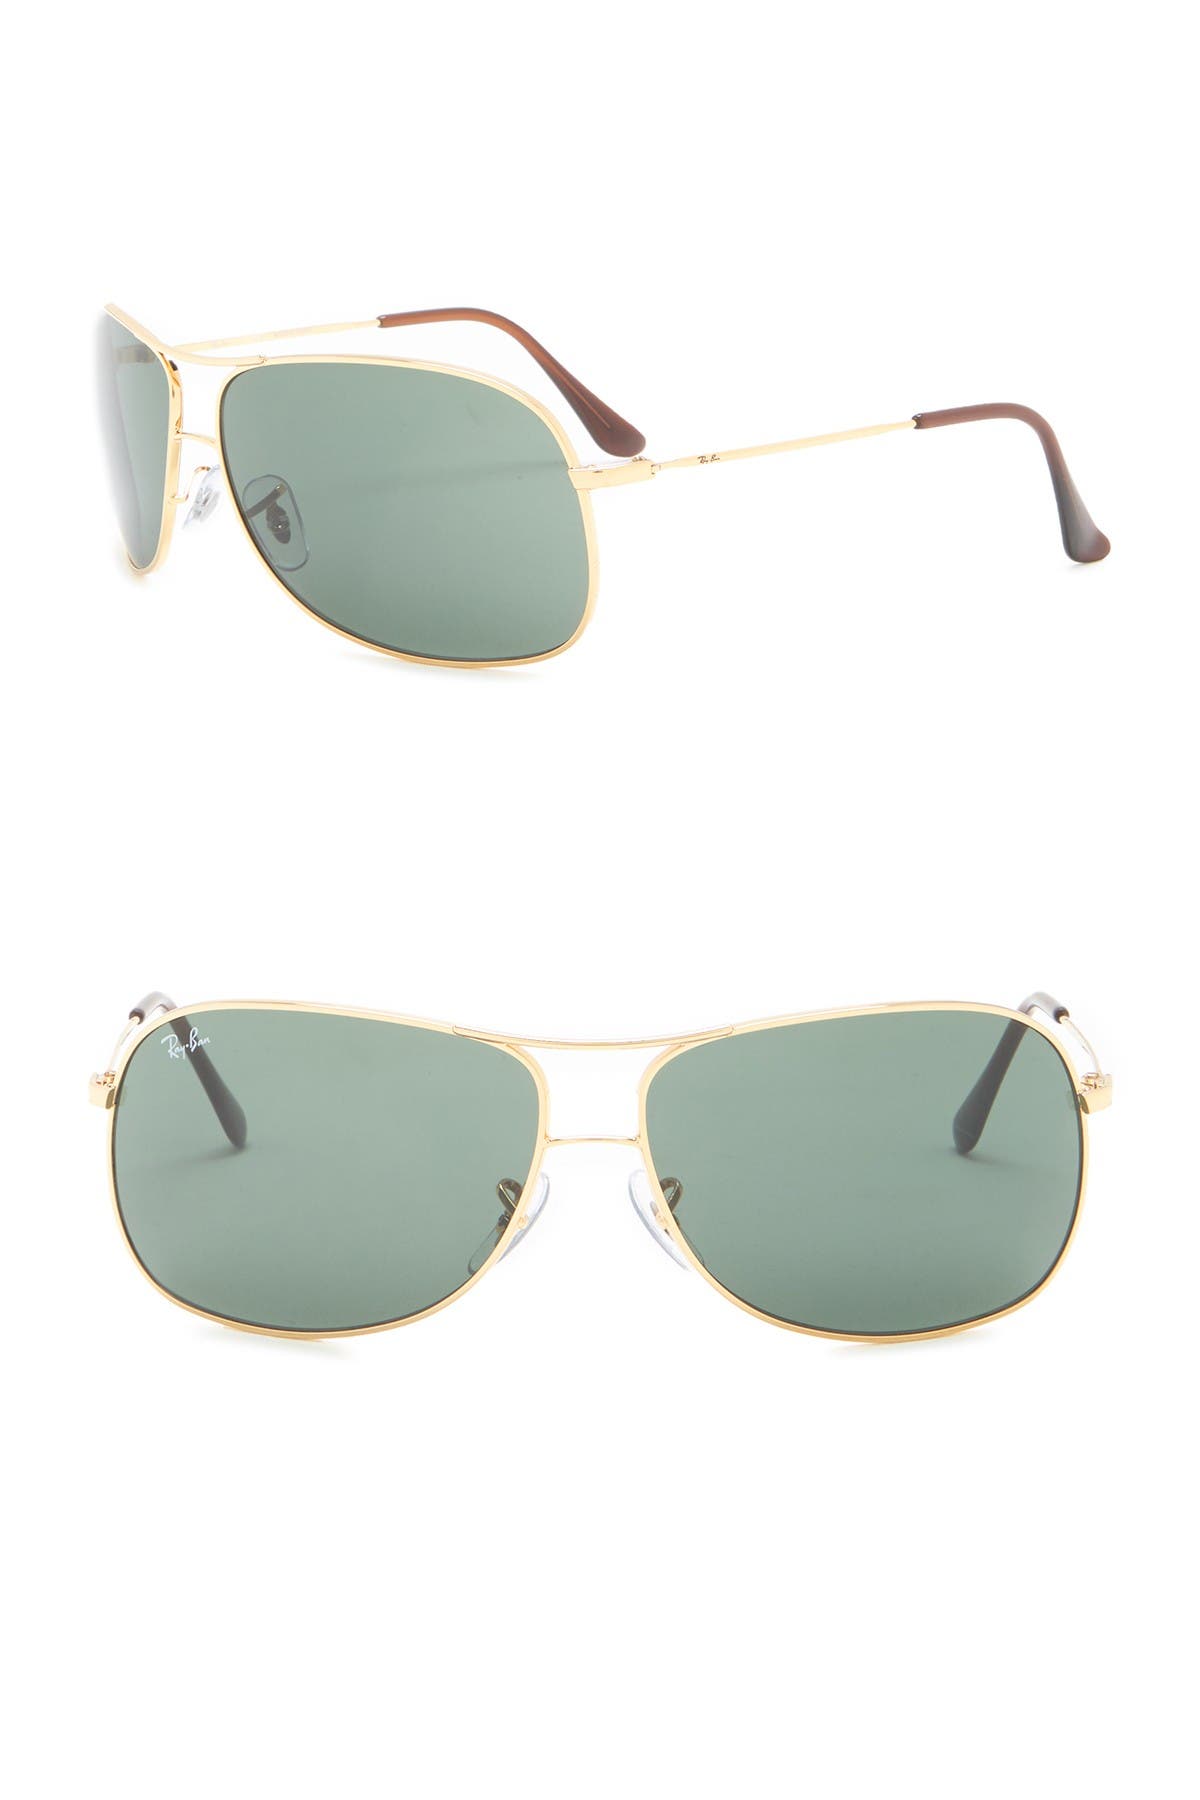 ray ban clubmaster nordstrom rack